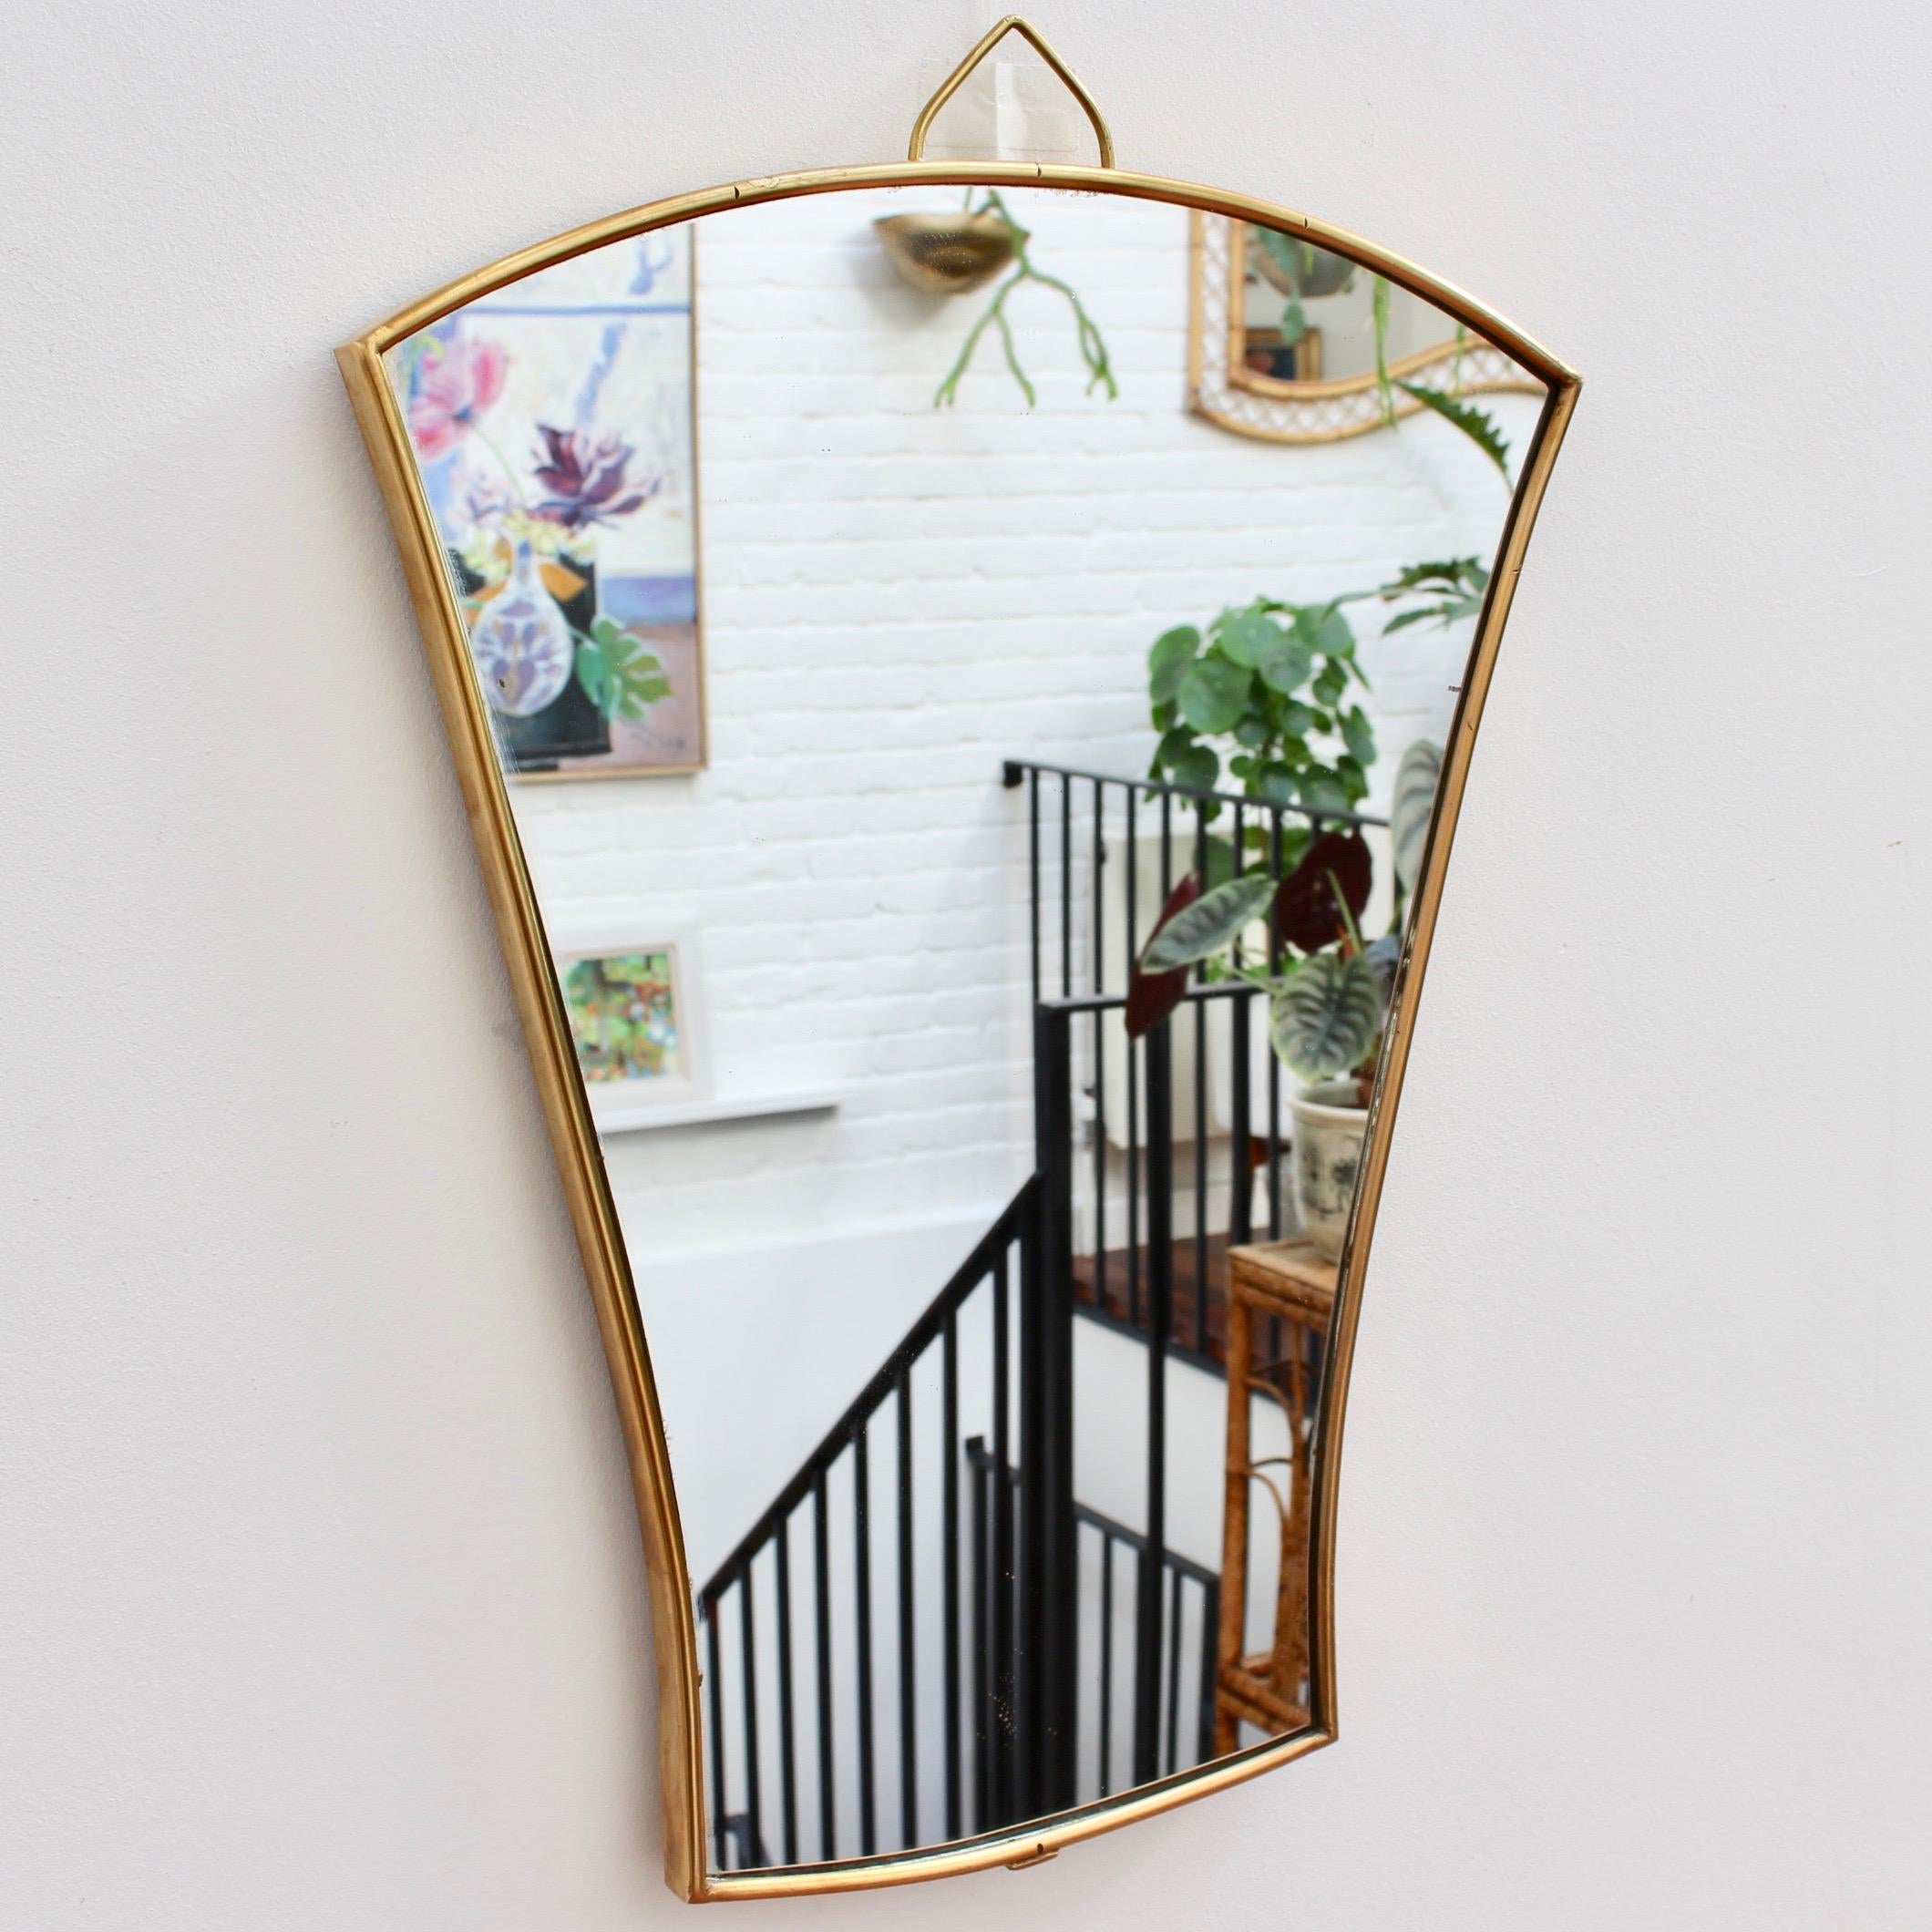 Midcentury Italian Fan-Shaped Wall Mirror with Brass Frame, circa 1950s, Small 6